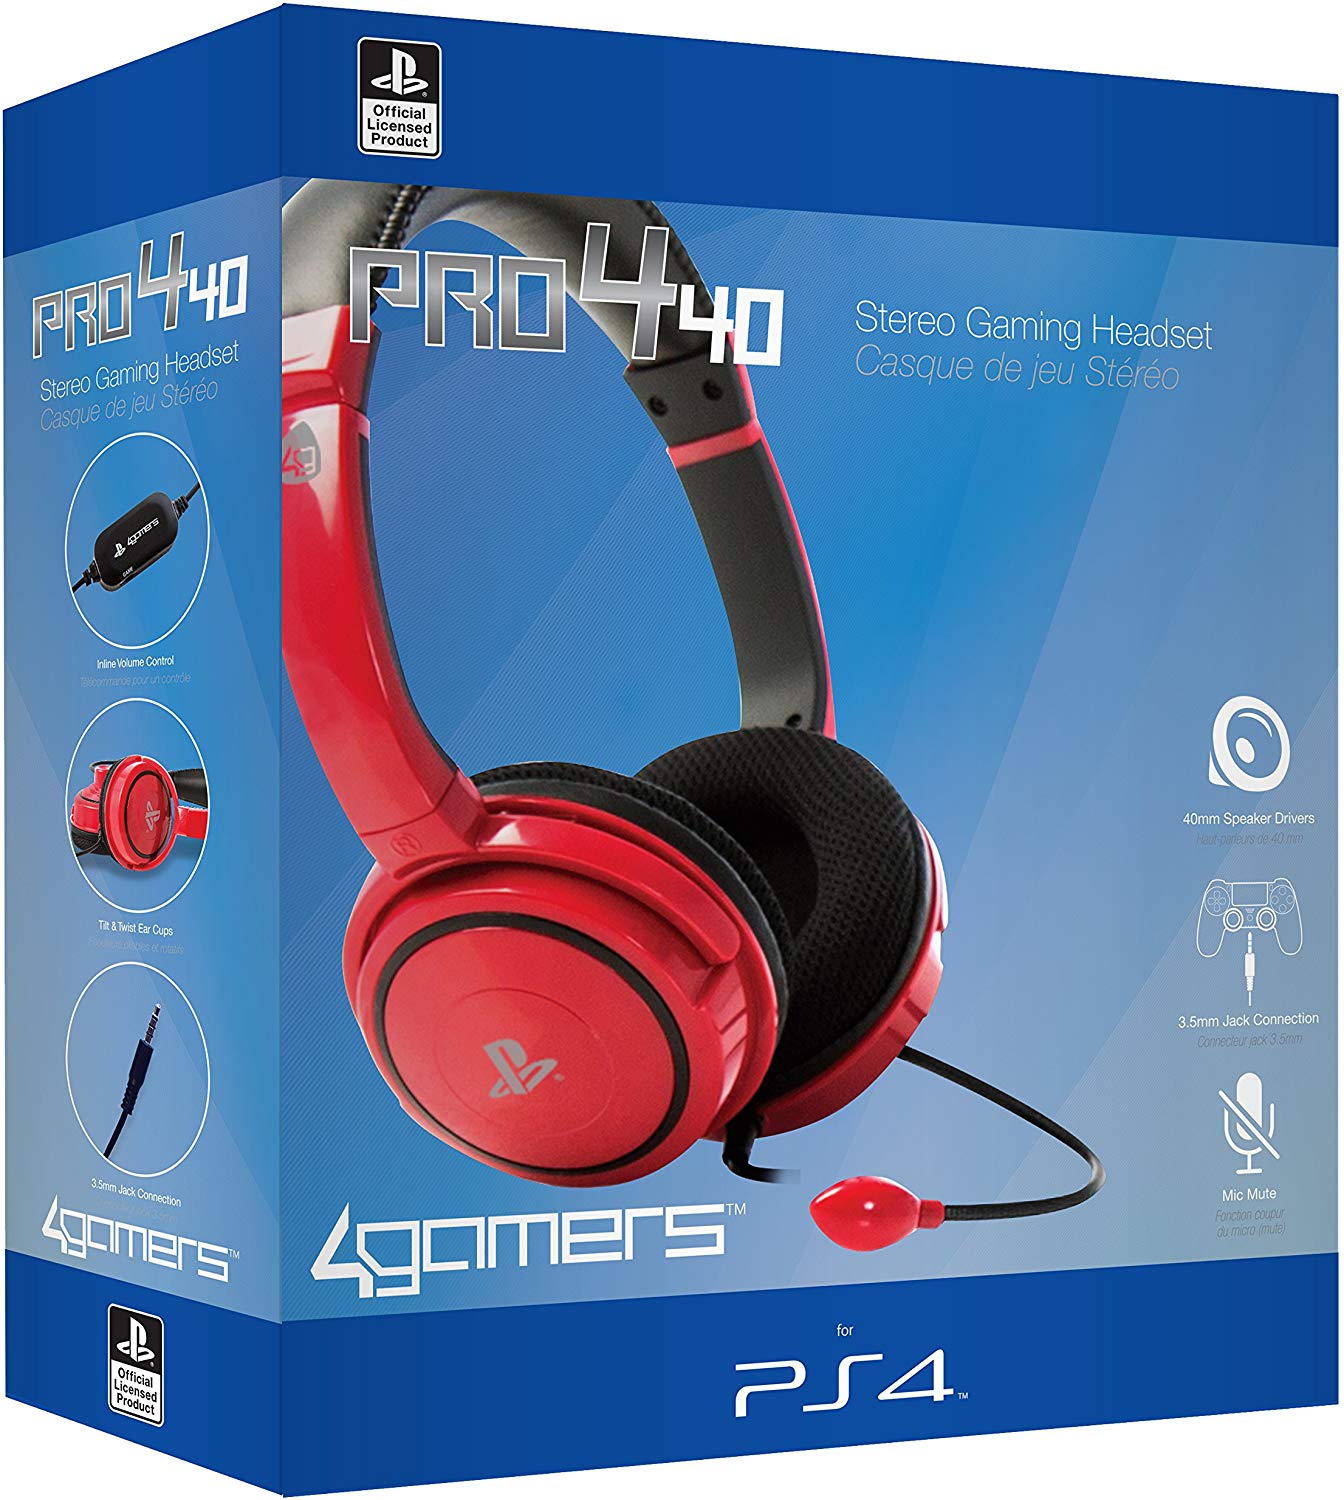 § 4Gamers - PRO 4-40 PS4 Licensed Wired Stereo Gaming Headset Red